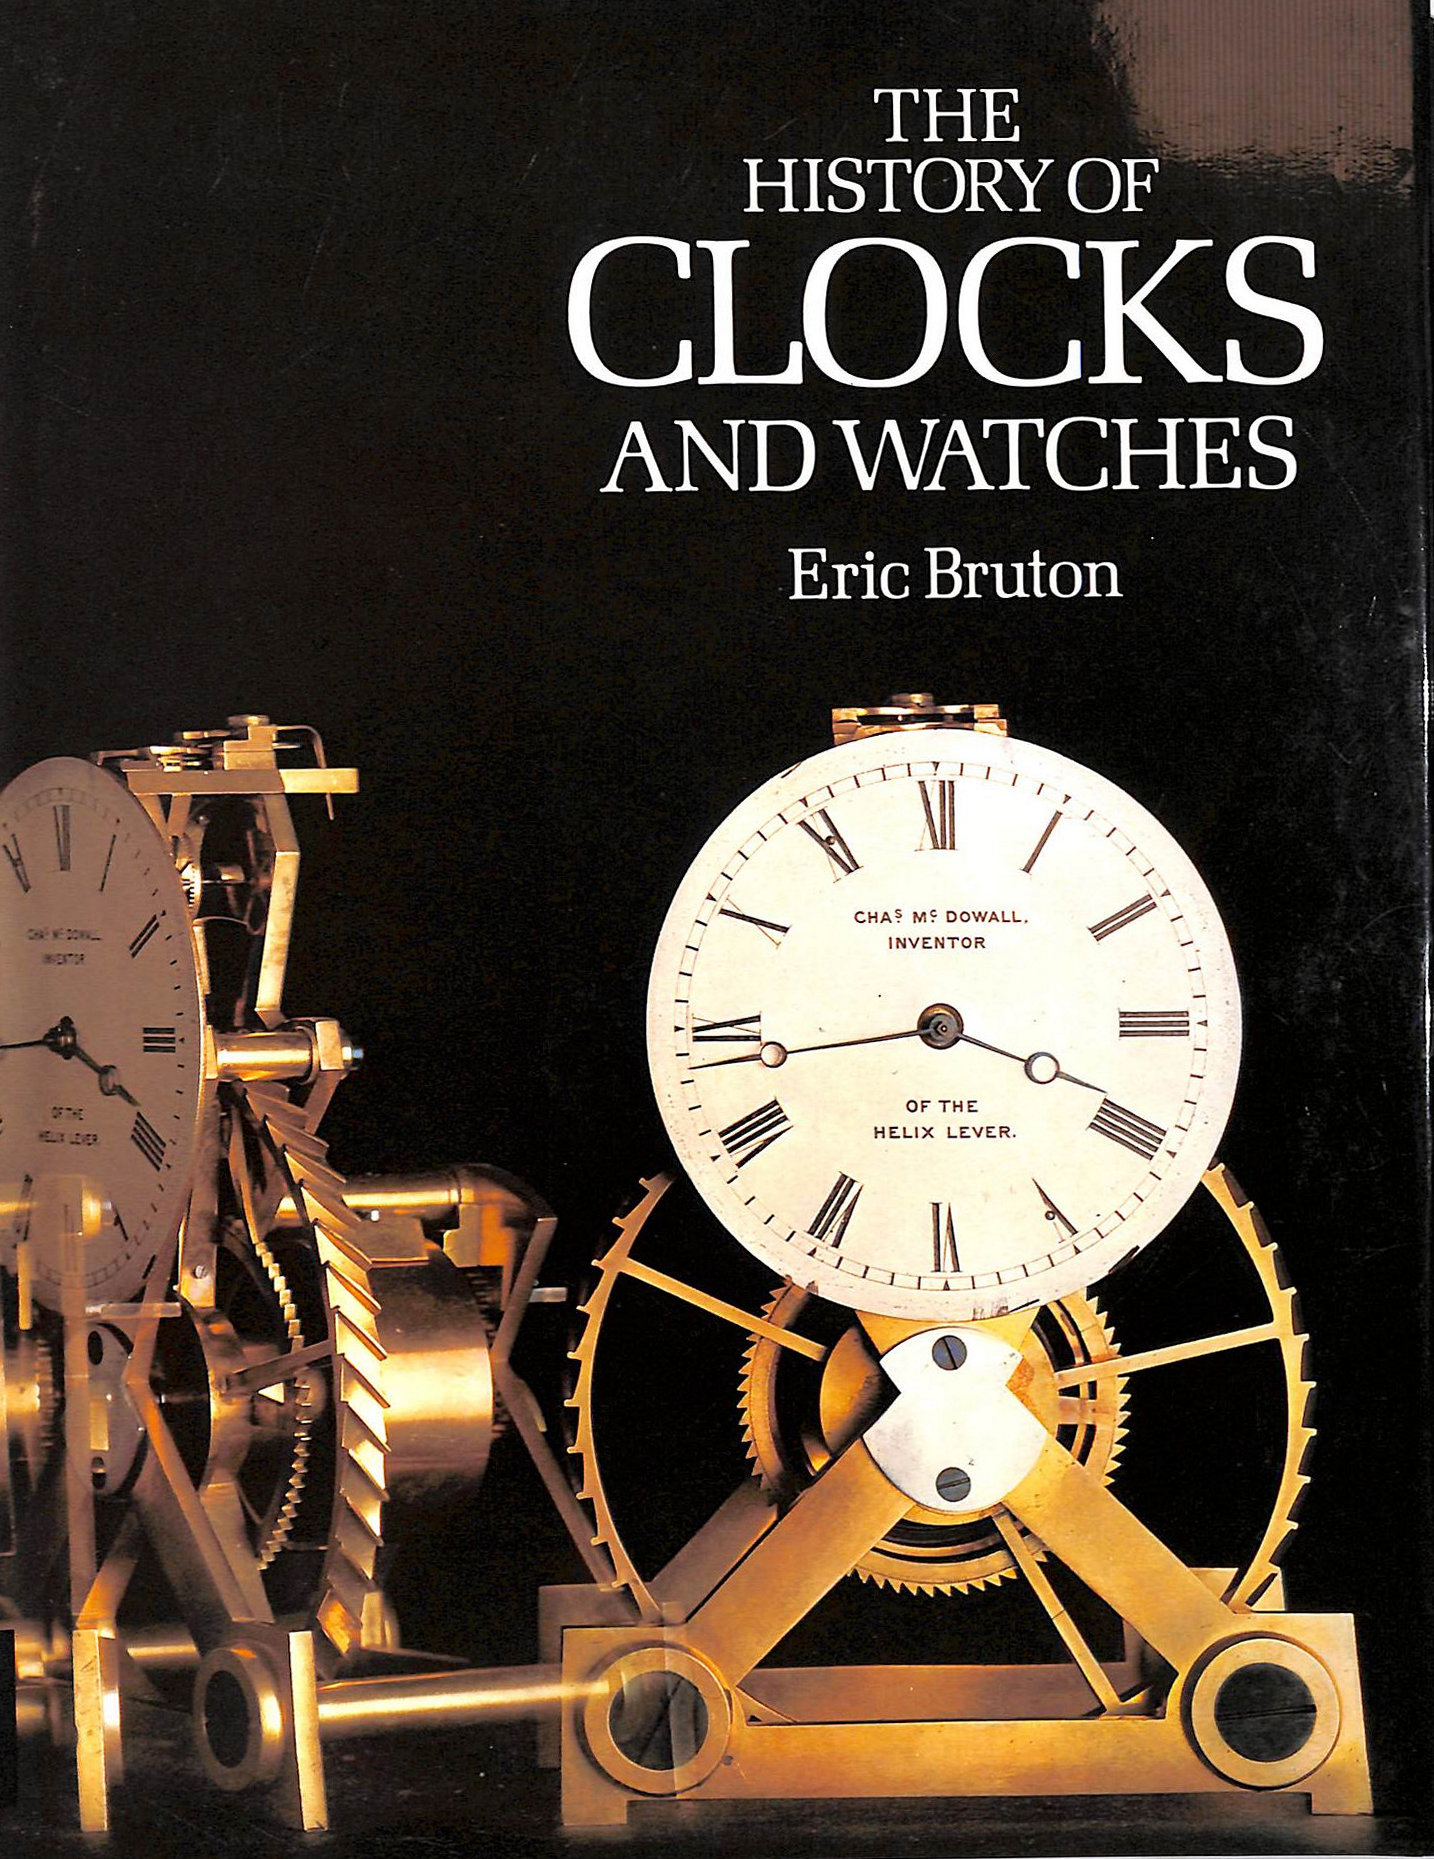 BRUTON, ERIC - The History of Clocks and Watches